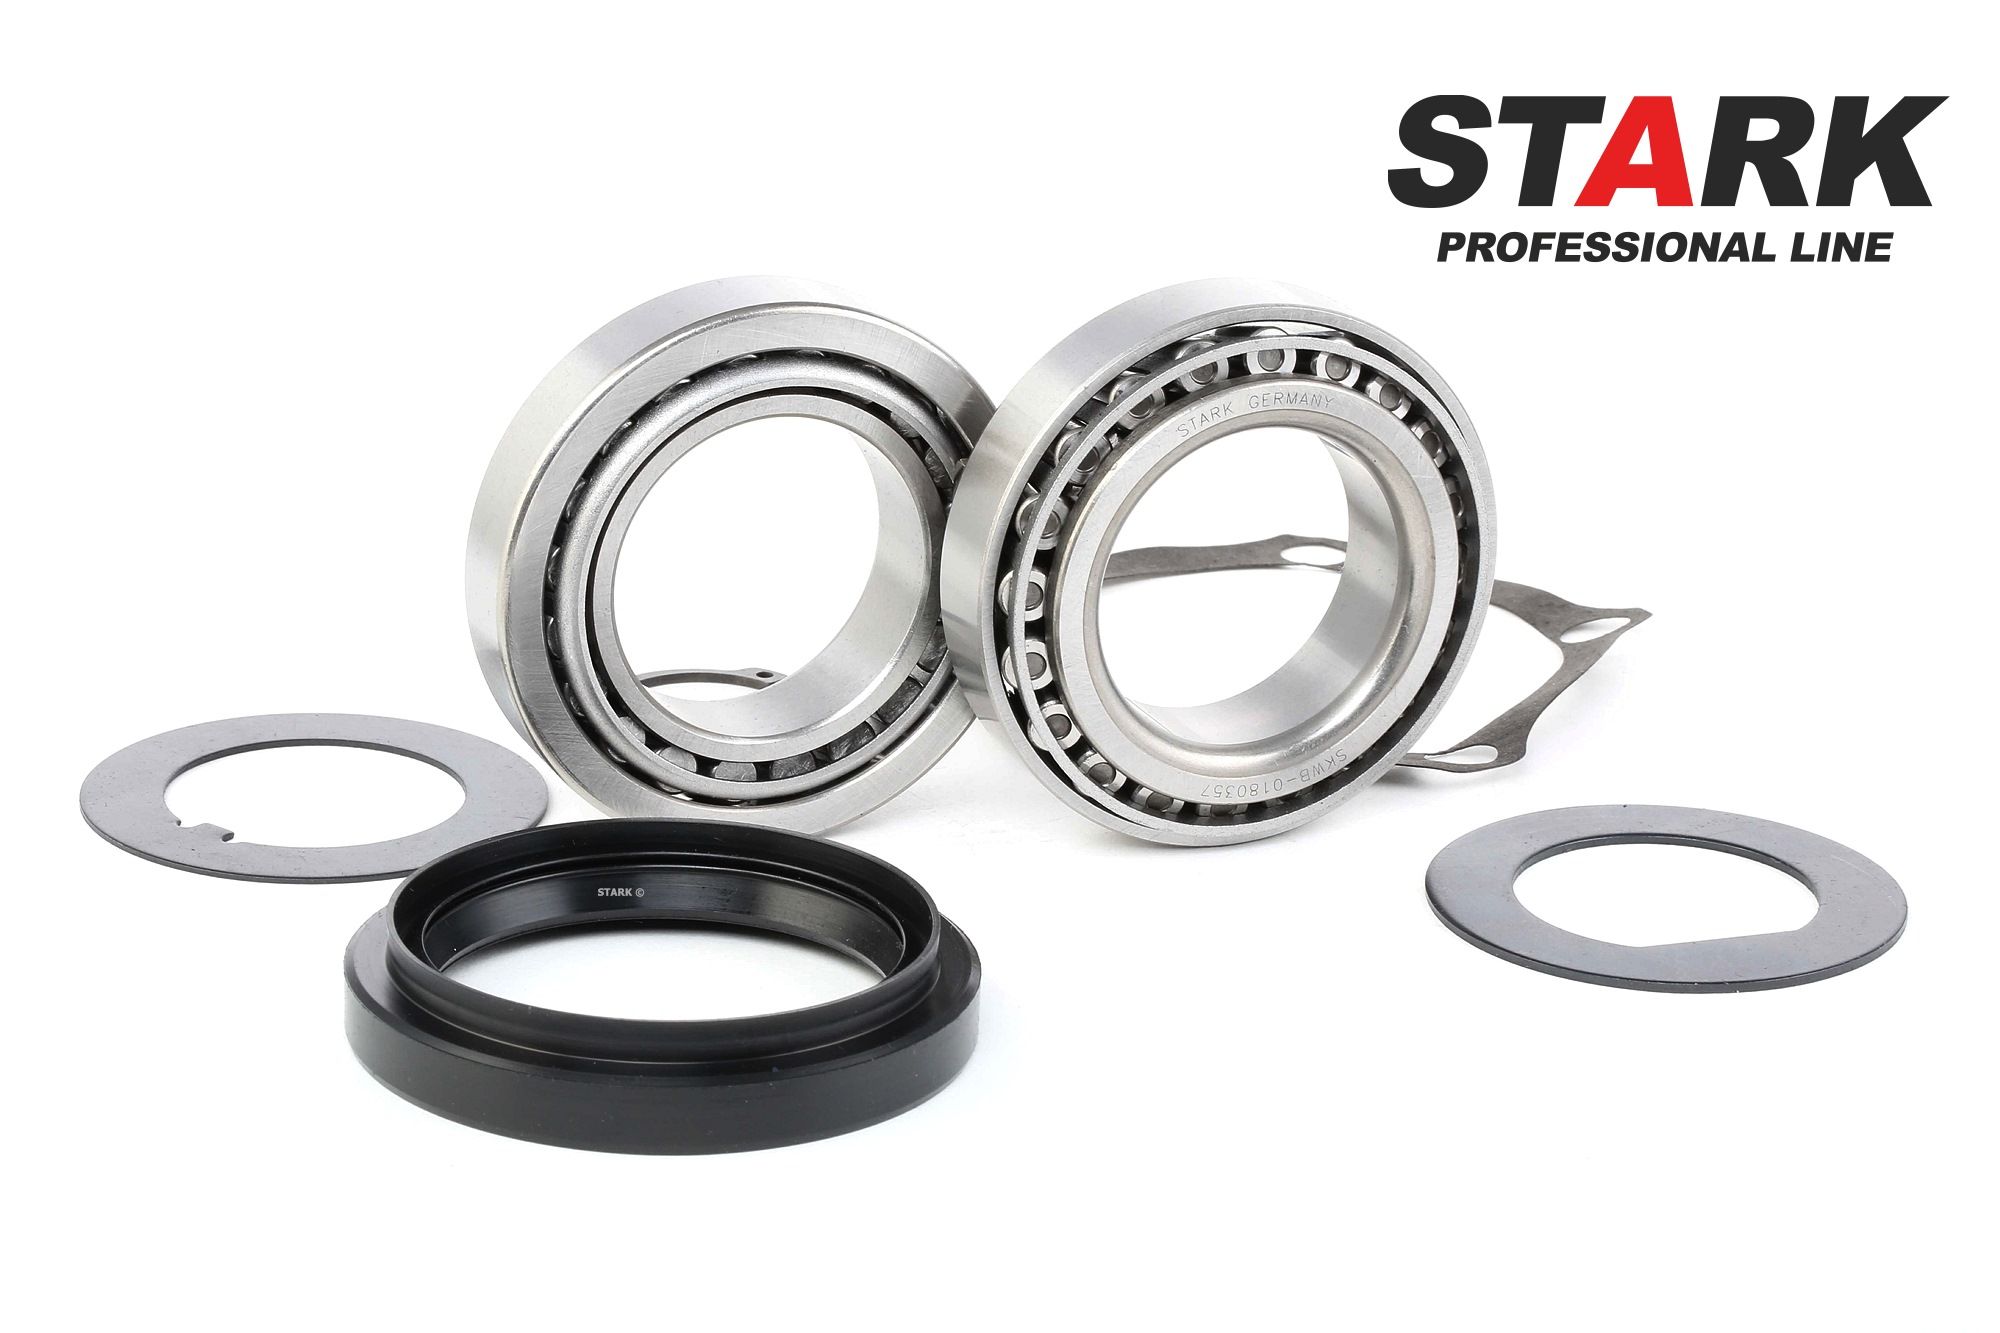 STARK SKWB-0180357 Wheel bearing kit Front axle both sides, Rear Axle both sides, 78 mm